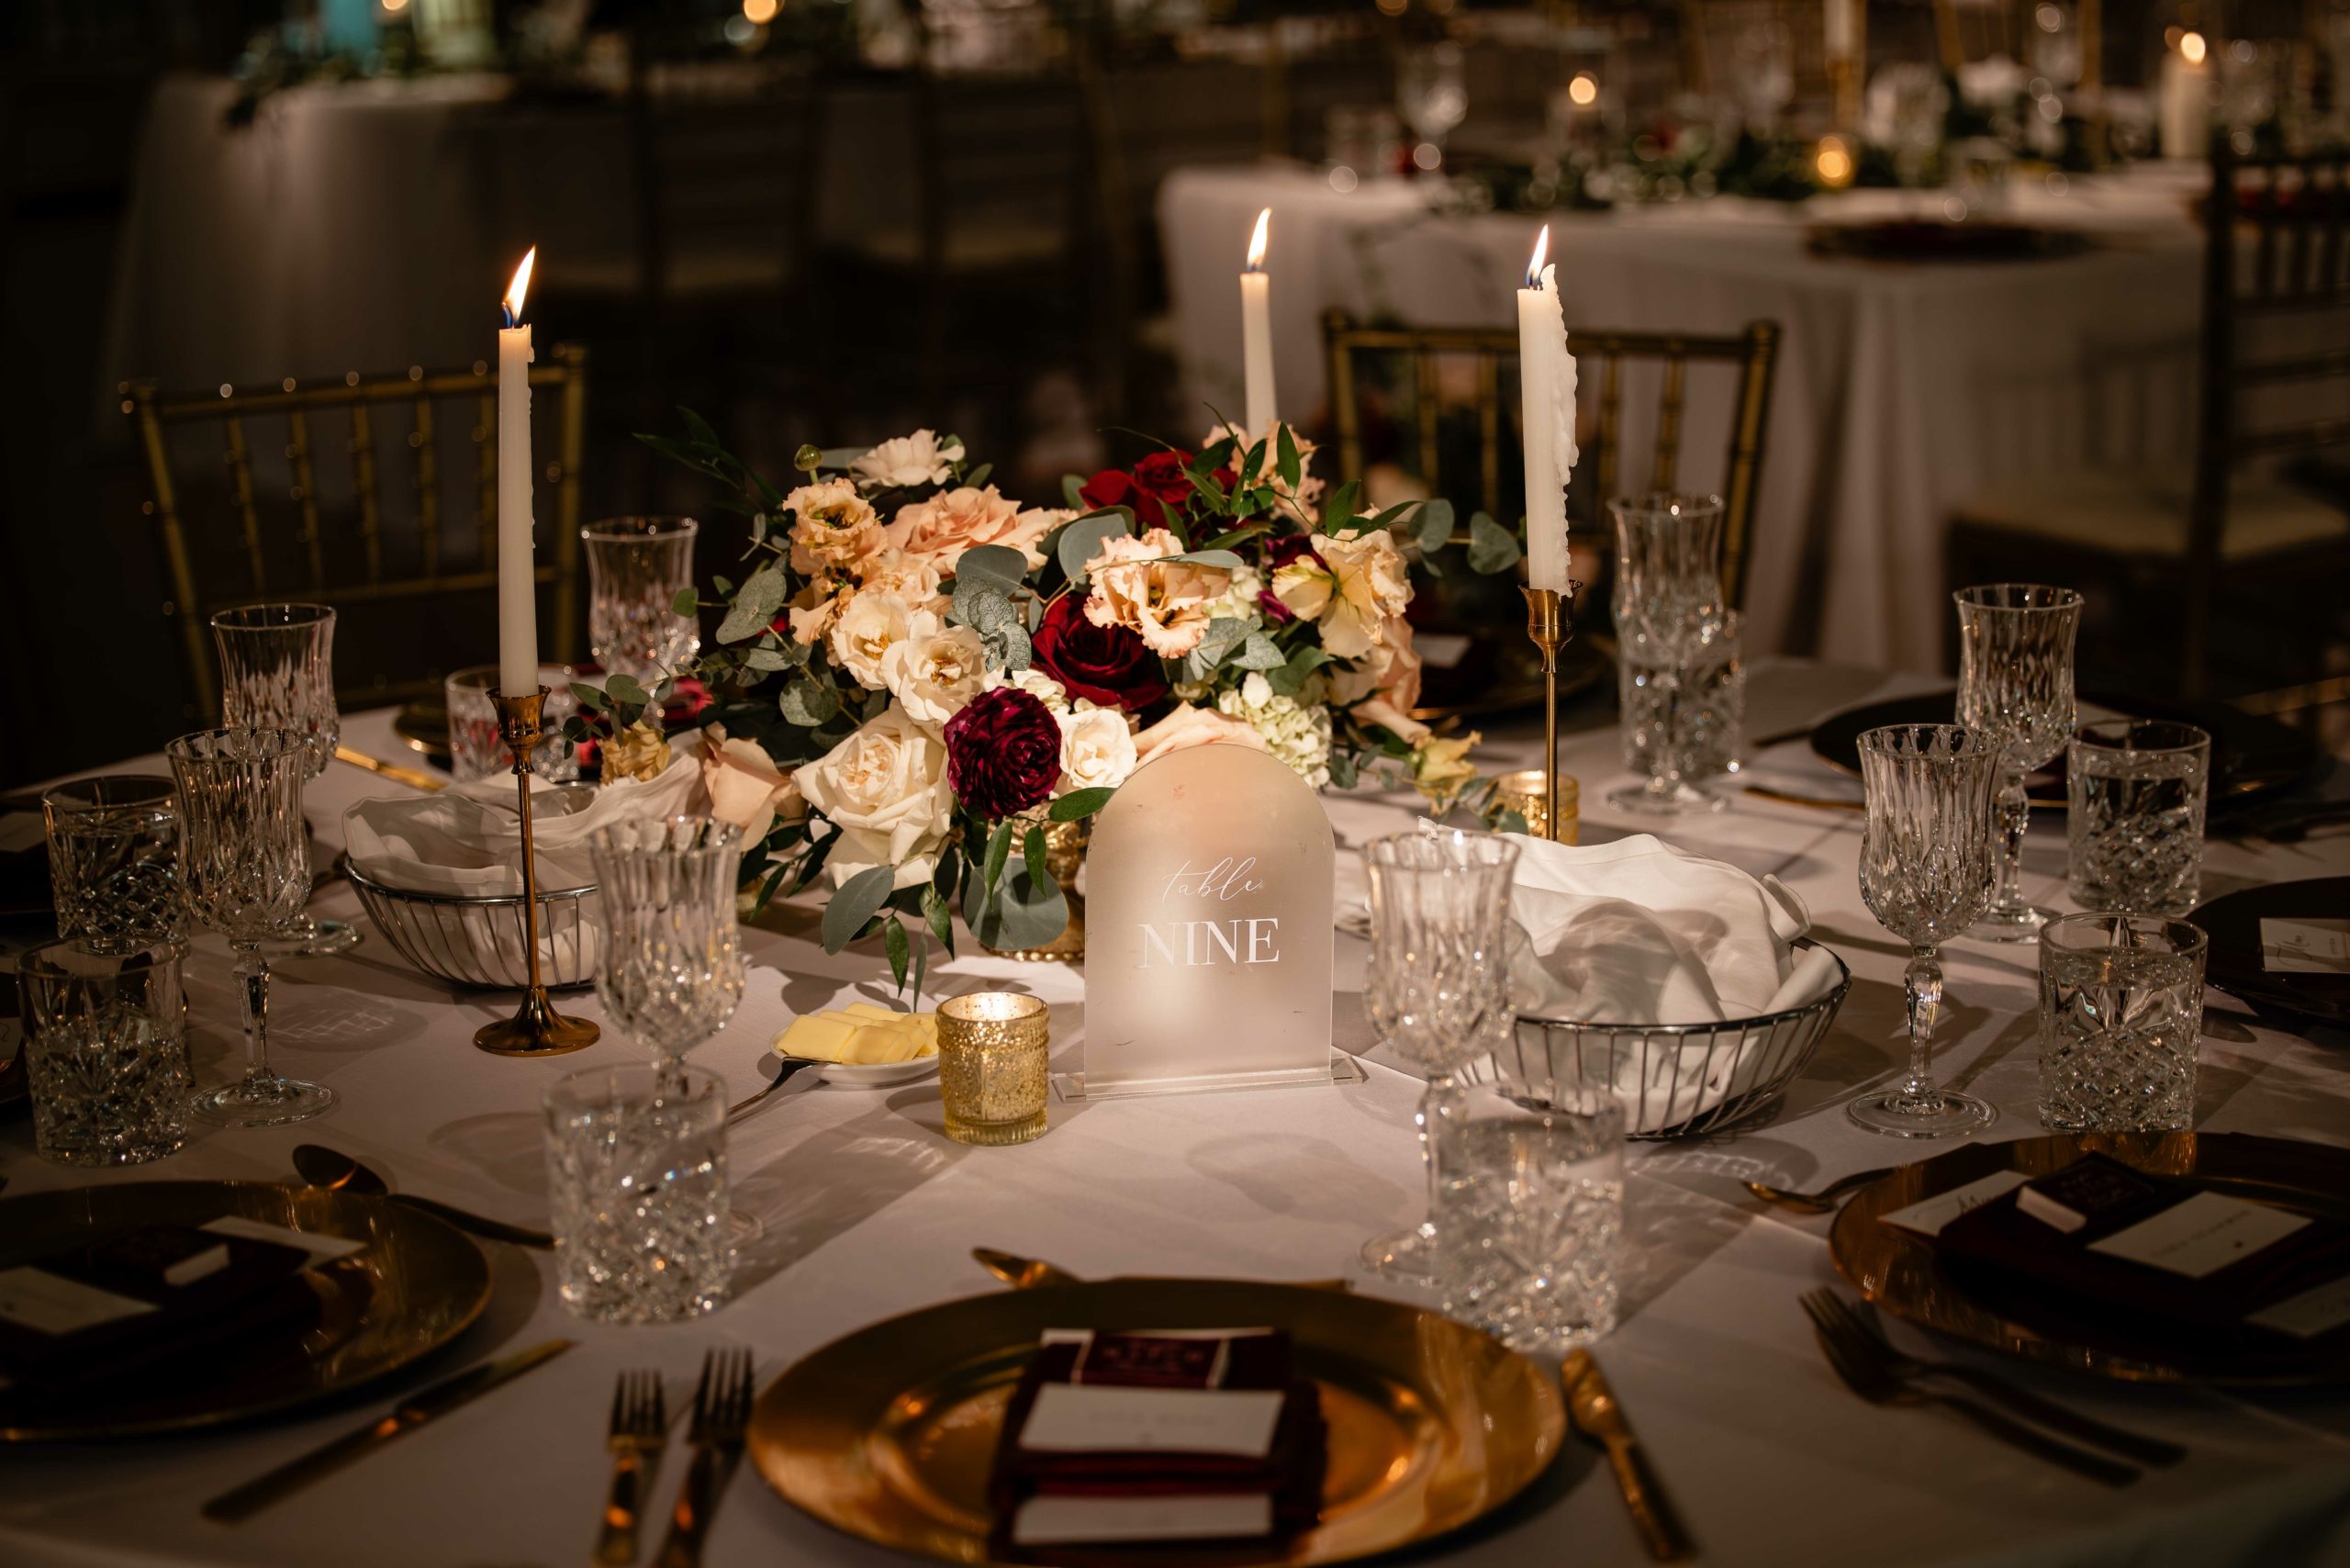 The shorter centrepieces on round tables, with beautiful blooms in burgundy, blush and ivory.